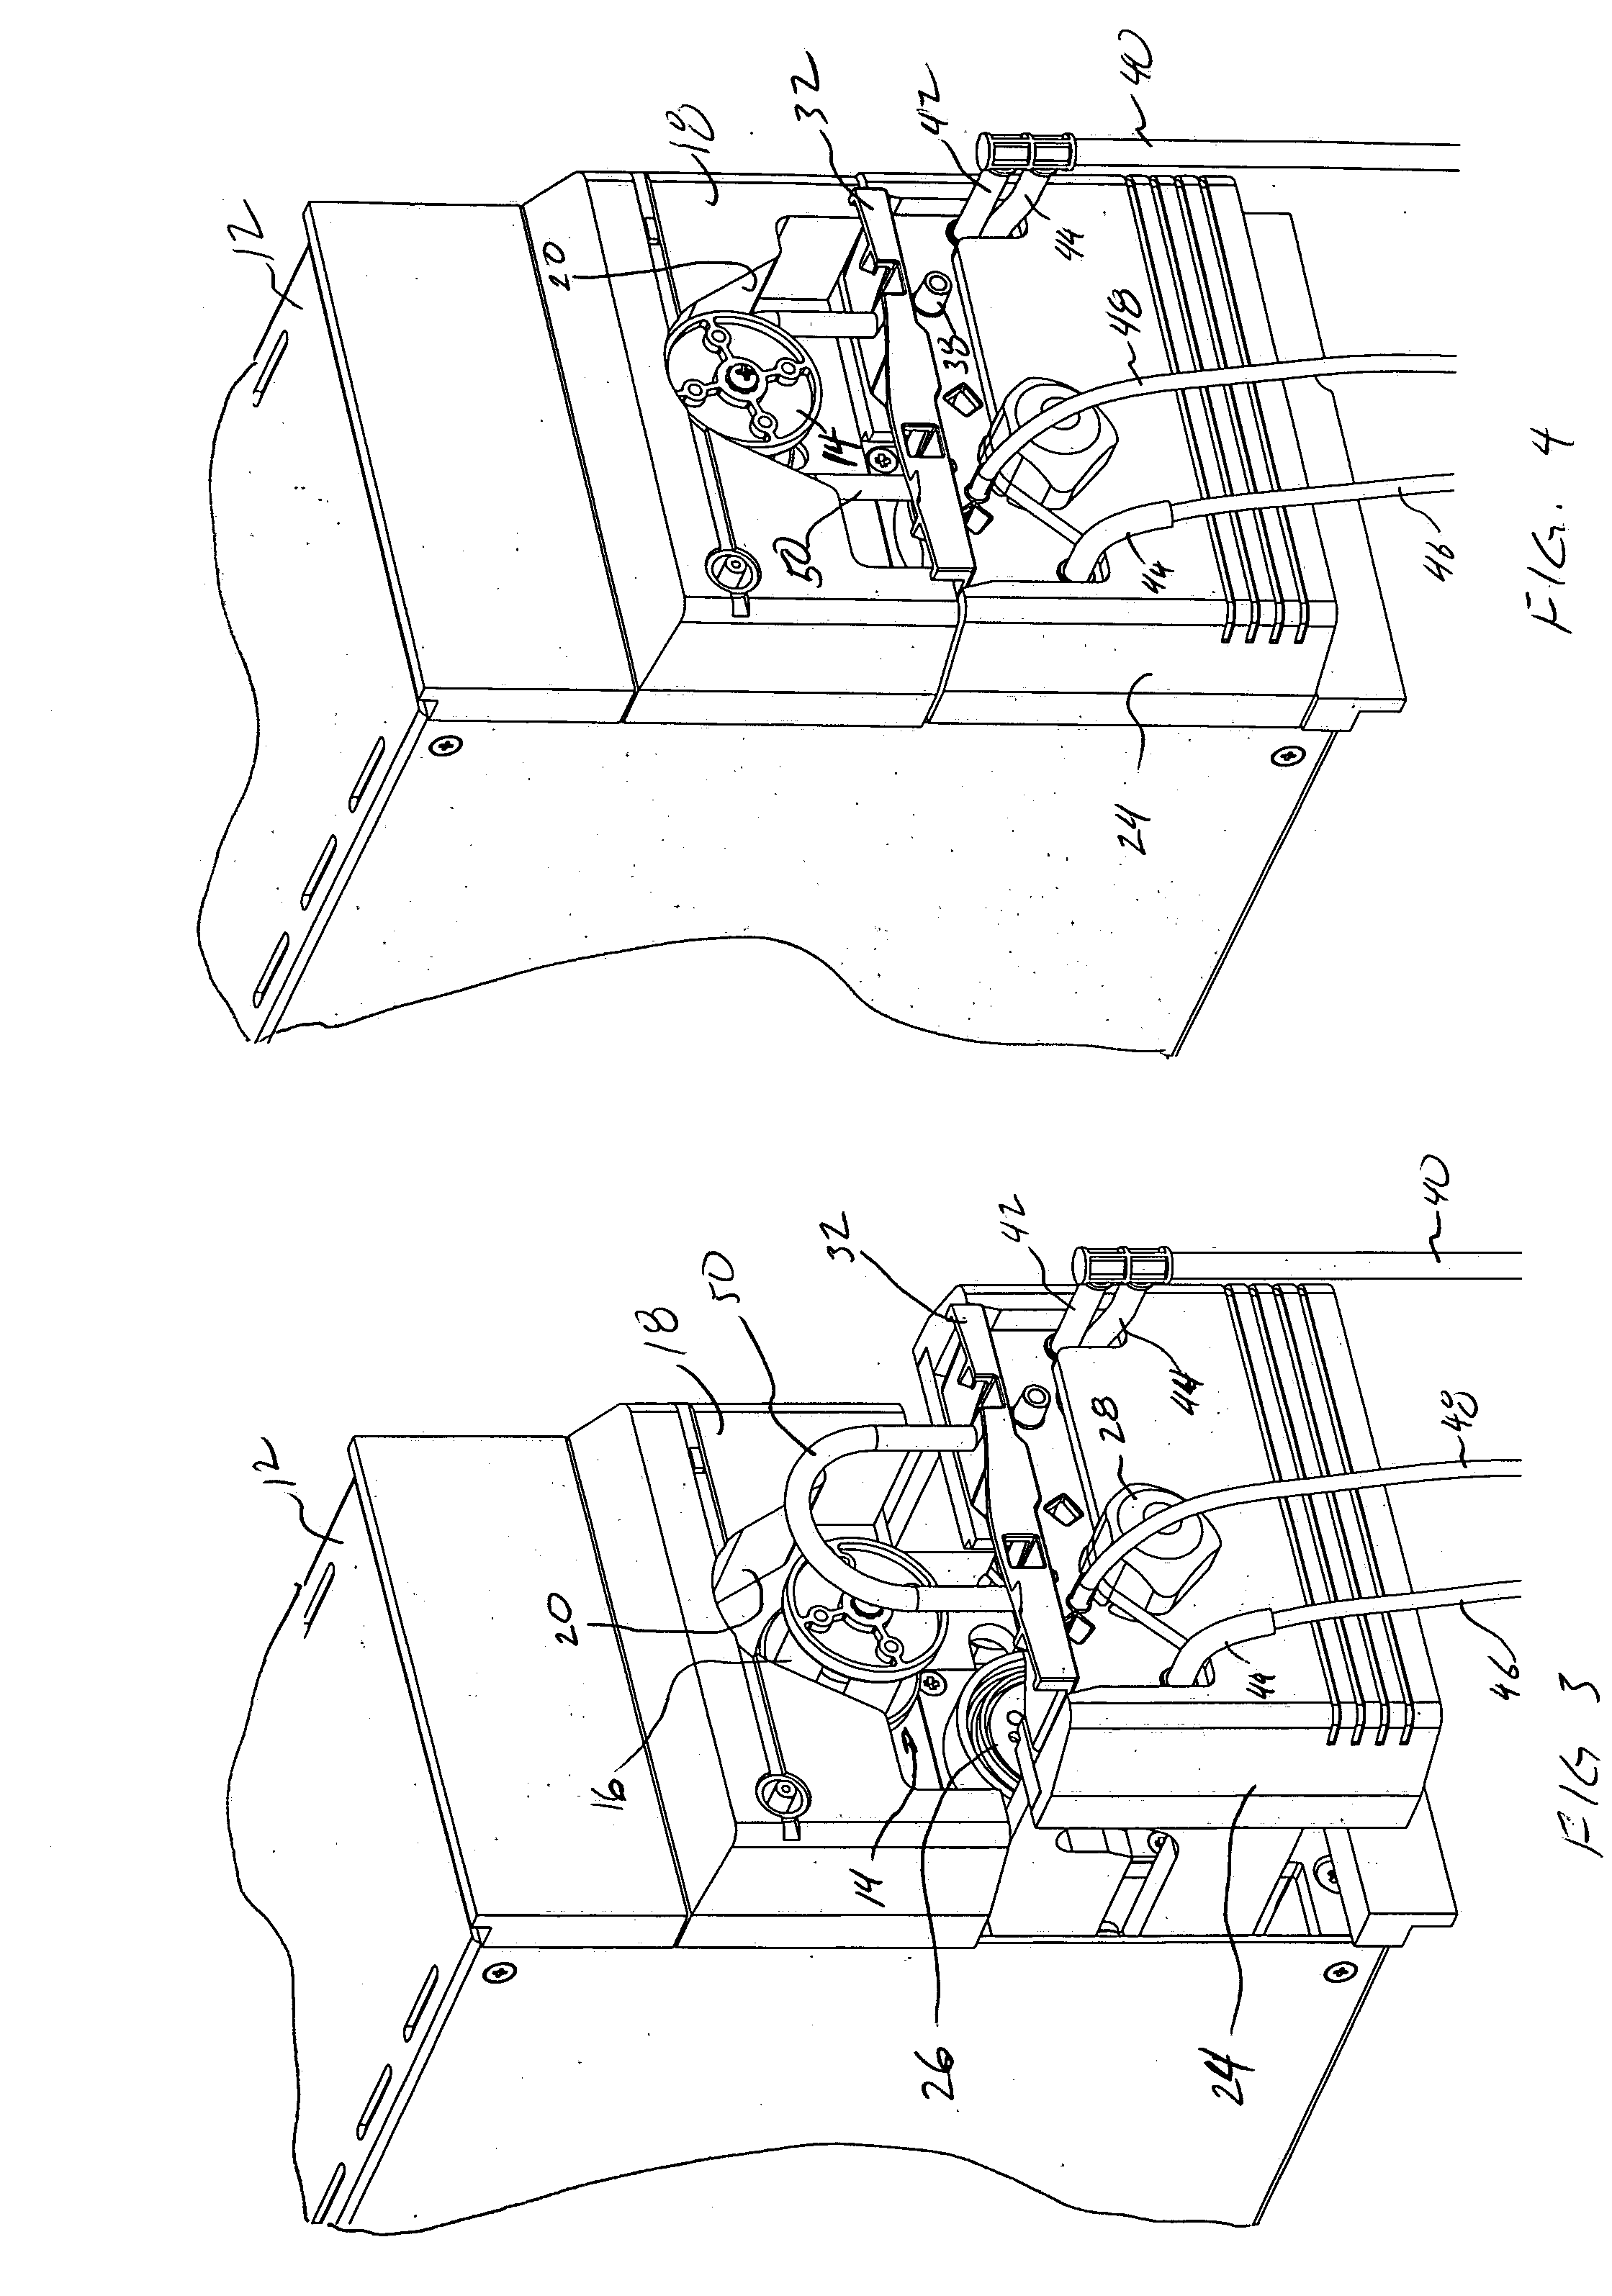 Peristaltic pump fitment for attachment to an aspirant collection bag